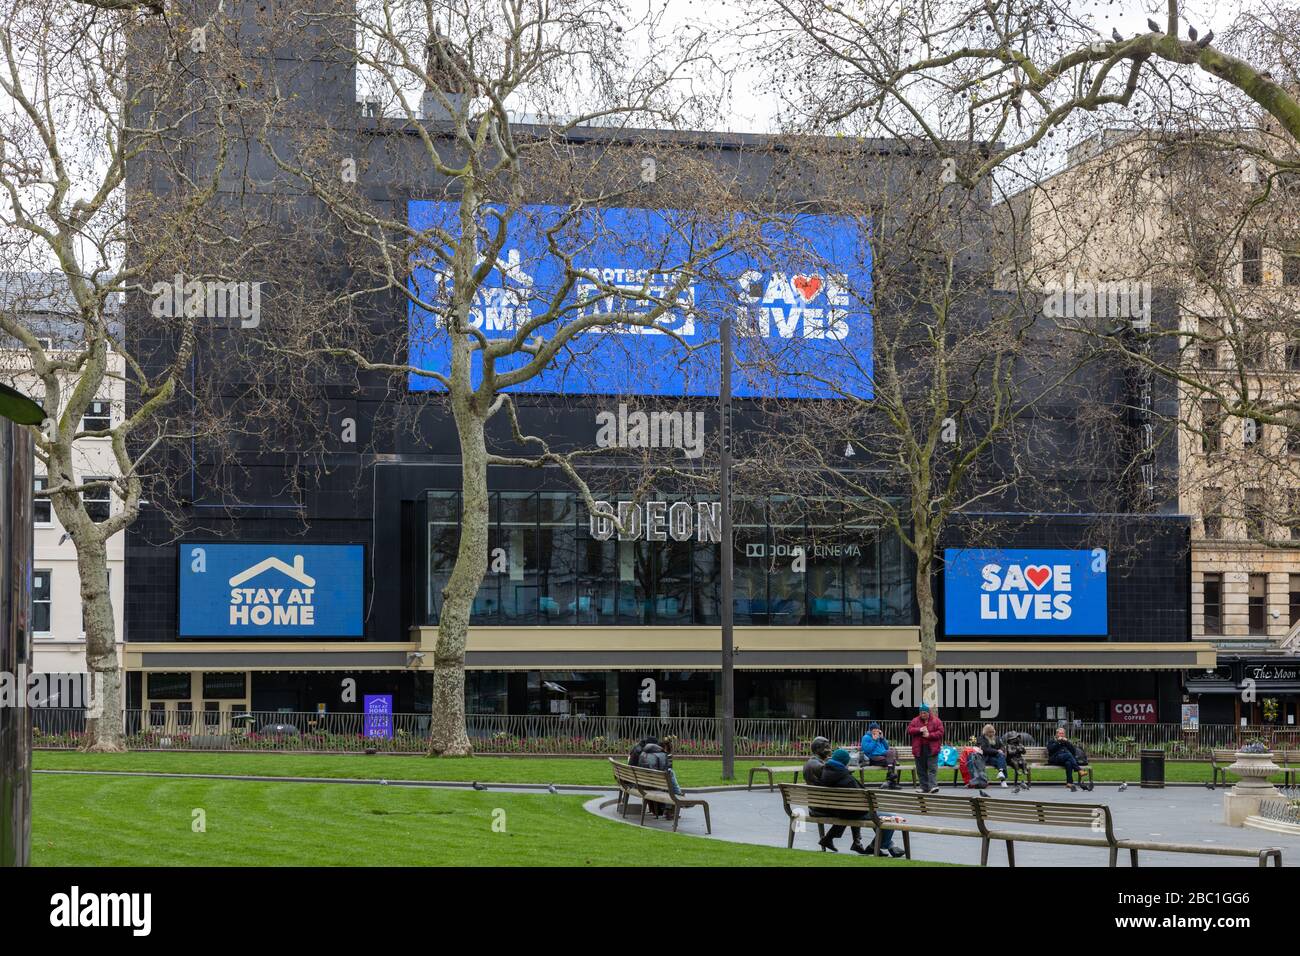 A nearly deserted Leicester Square in Central London during the corona virus outbreak. The Odeon Cinema has signs warning people to Save Lives etc. Stock Photo